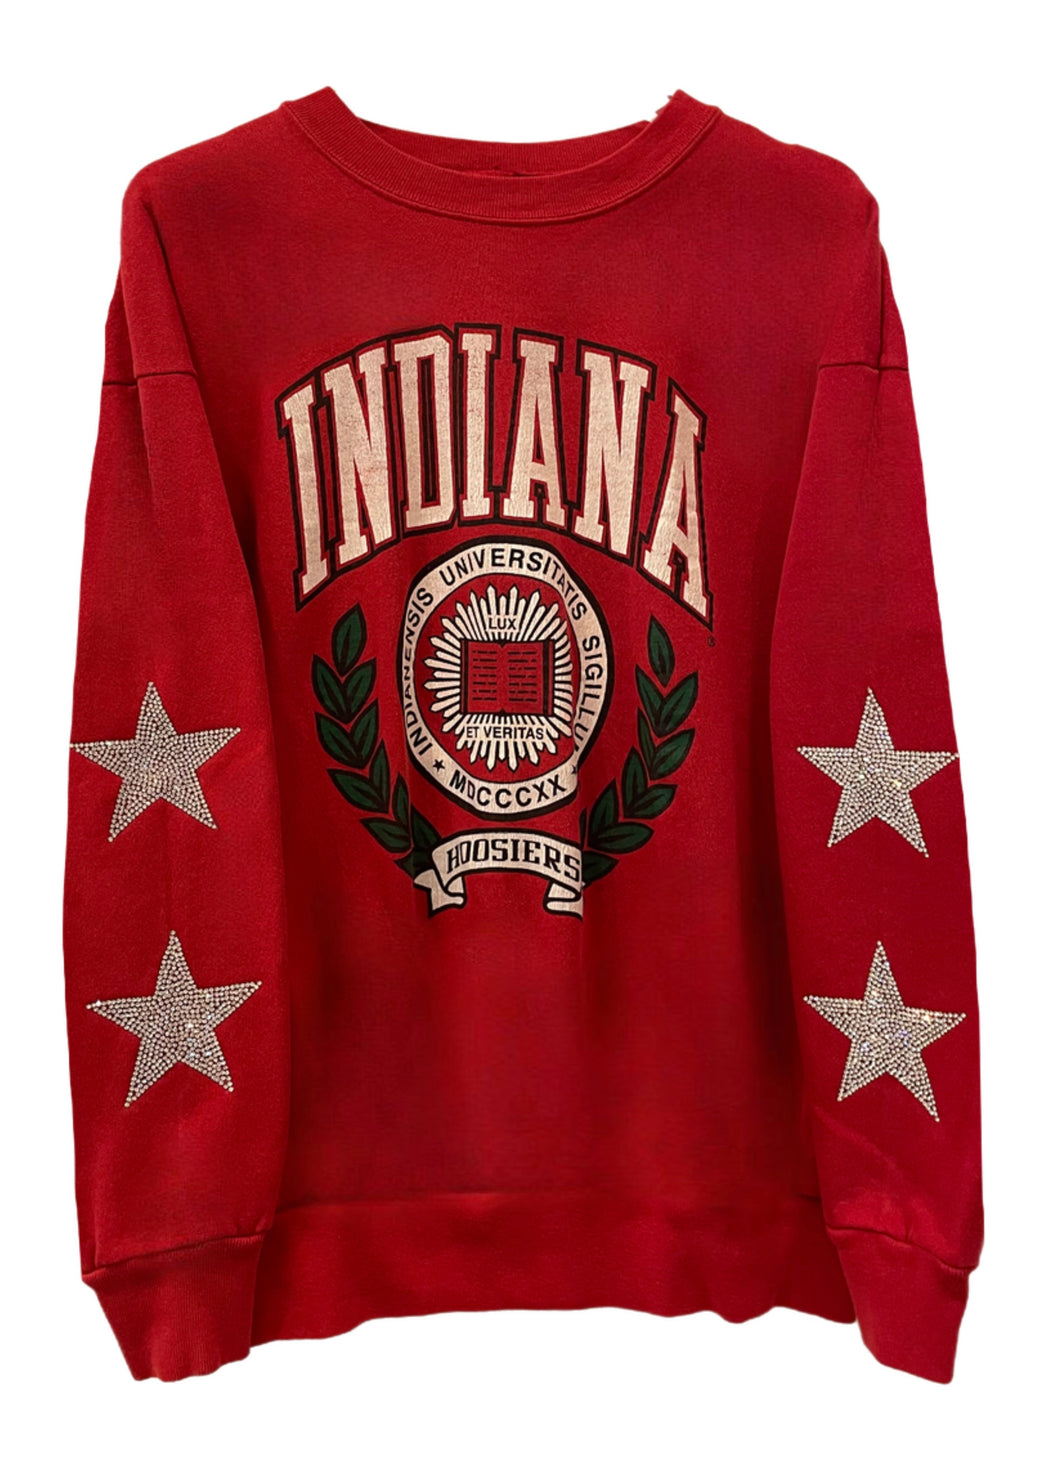 Indiana University One of a KIND Vintage Sweatshirt with Crystal Star Design